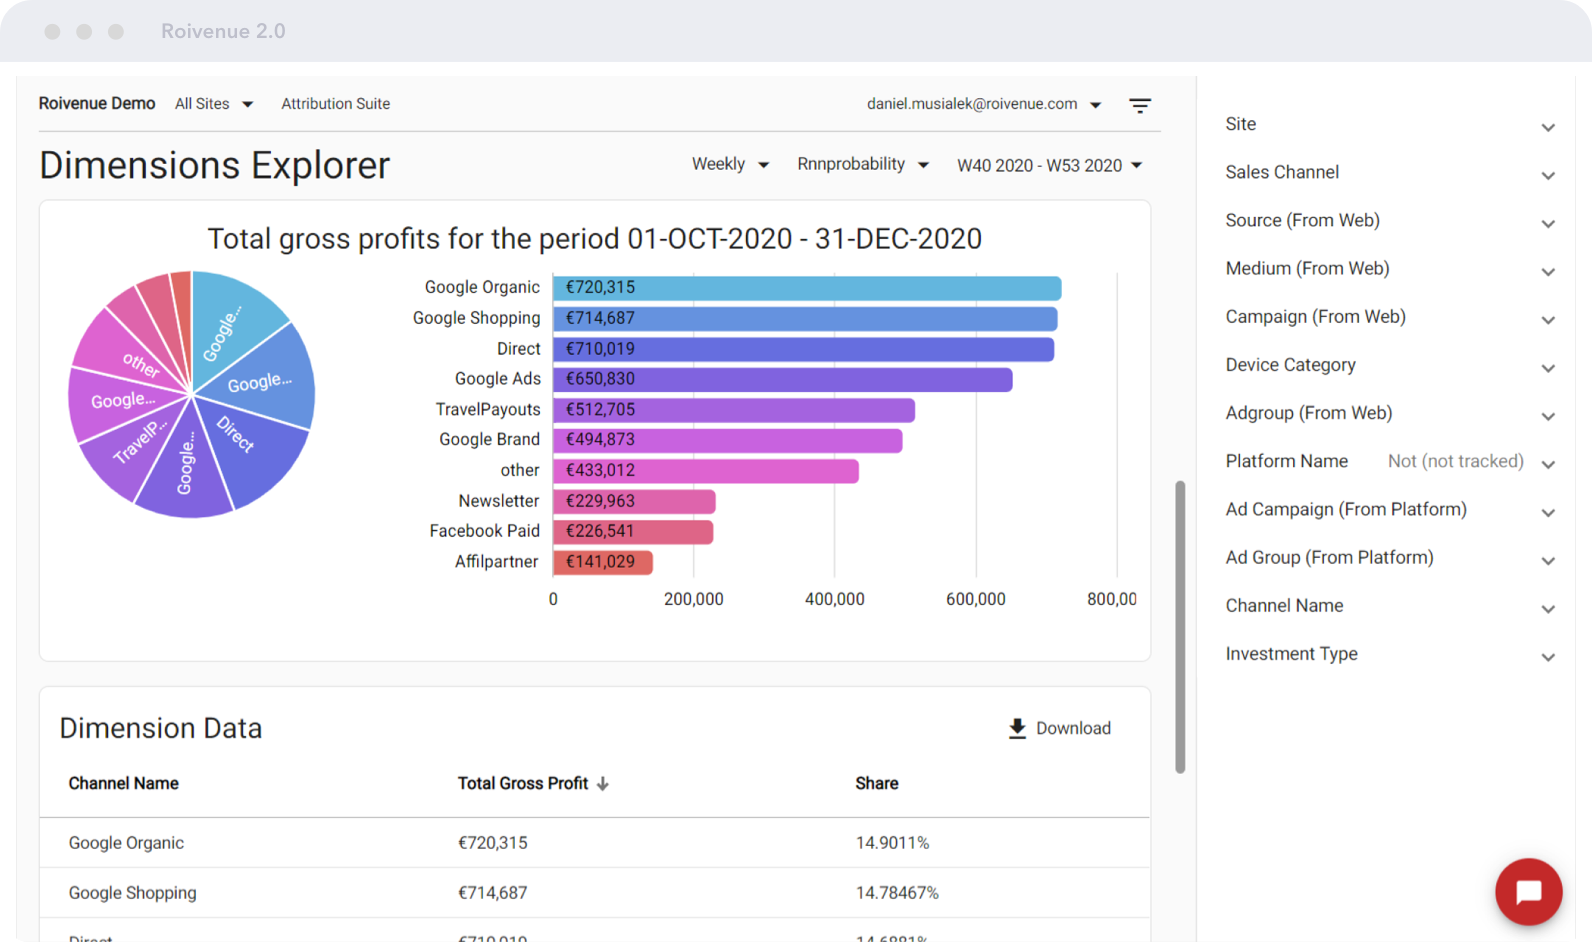 ROIVENUE Dimensions explorer | Zoom in on the details | Discover how totals break down into their individual components. Analyze performance metrics and KPIs across dimensions to uncover actionable insights.